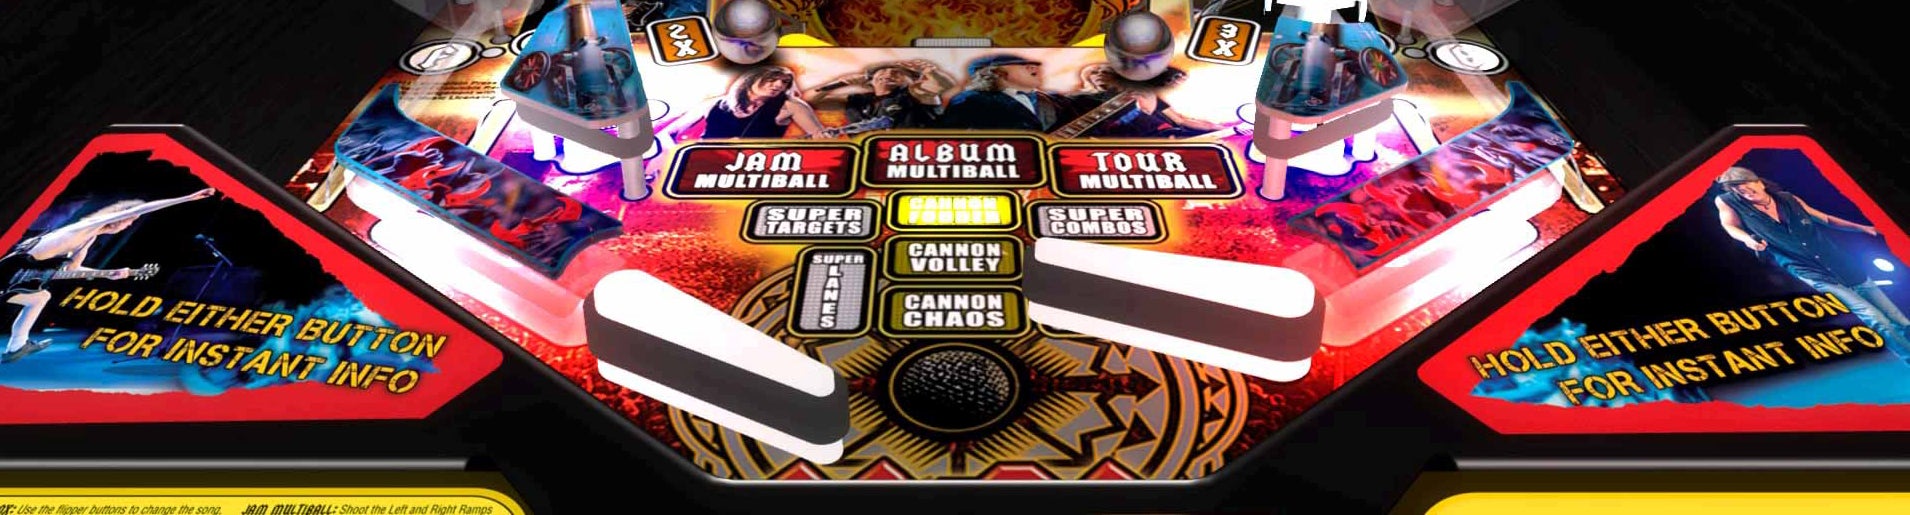 Image for Stern Pinball Arcade PS4 Review: Superb Silverball Simulation